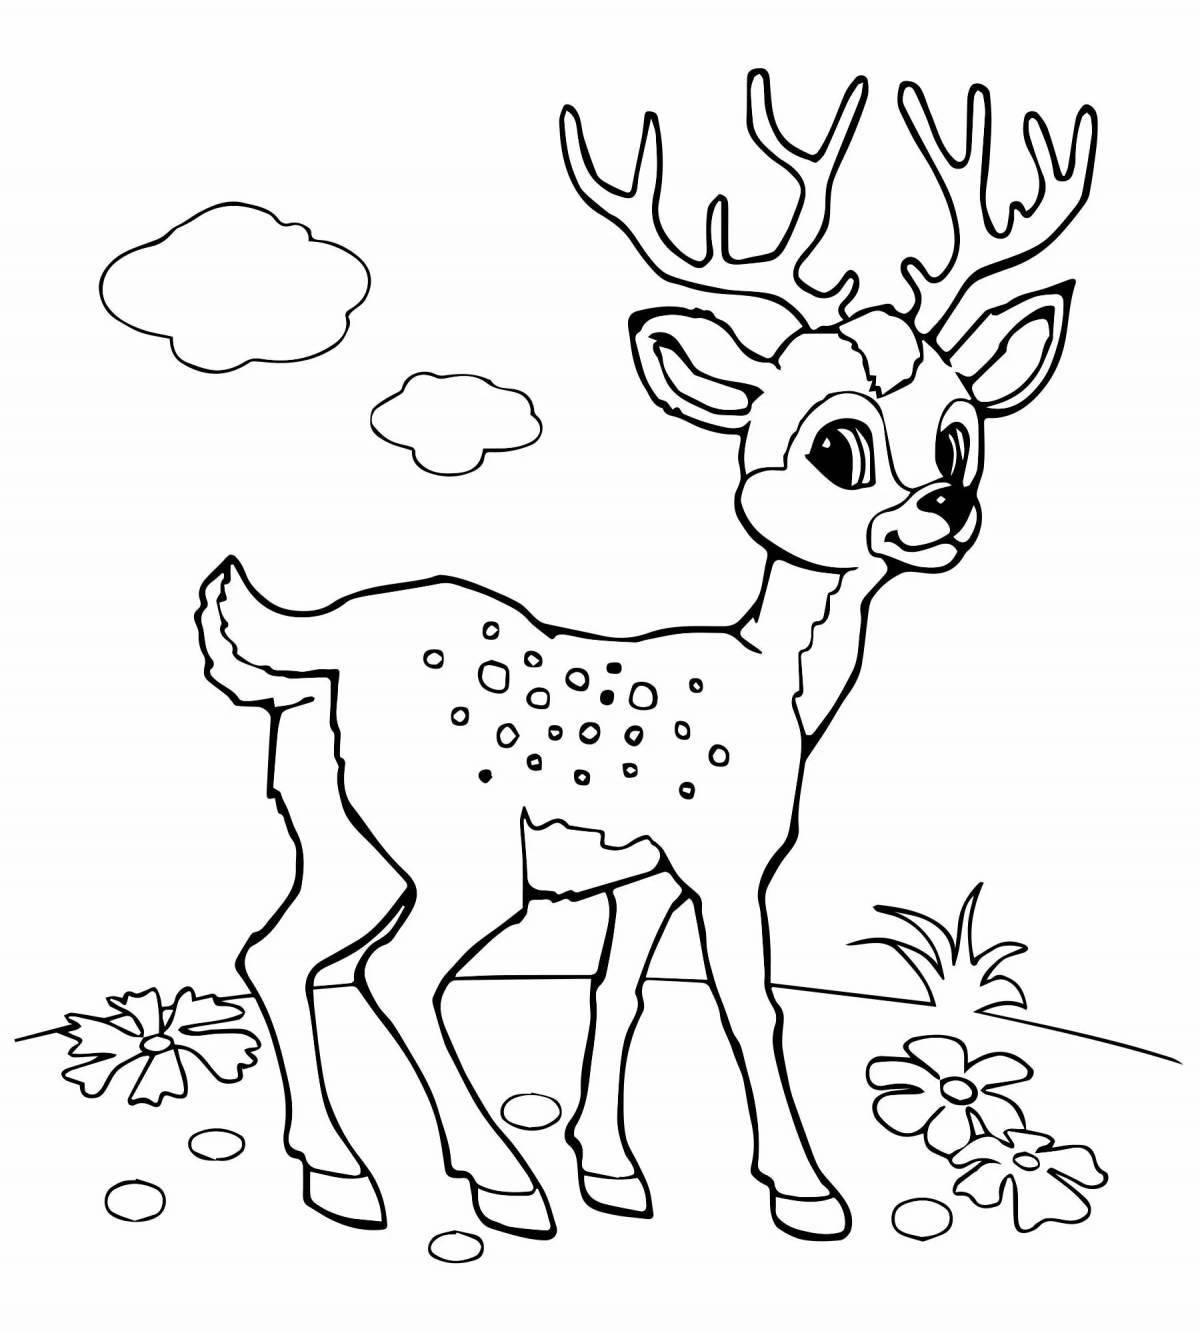 Playful forest animals coloring page for 4-5 year olds